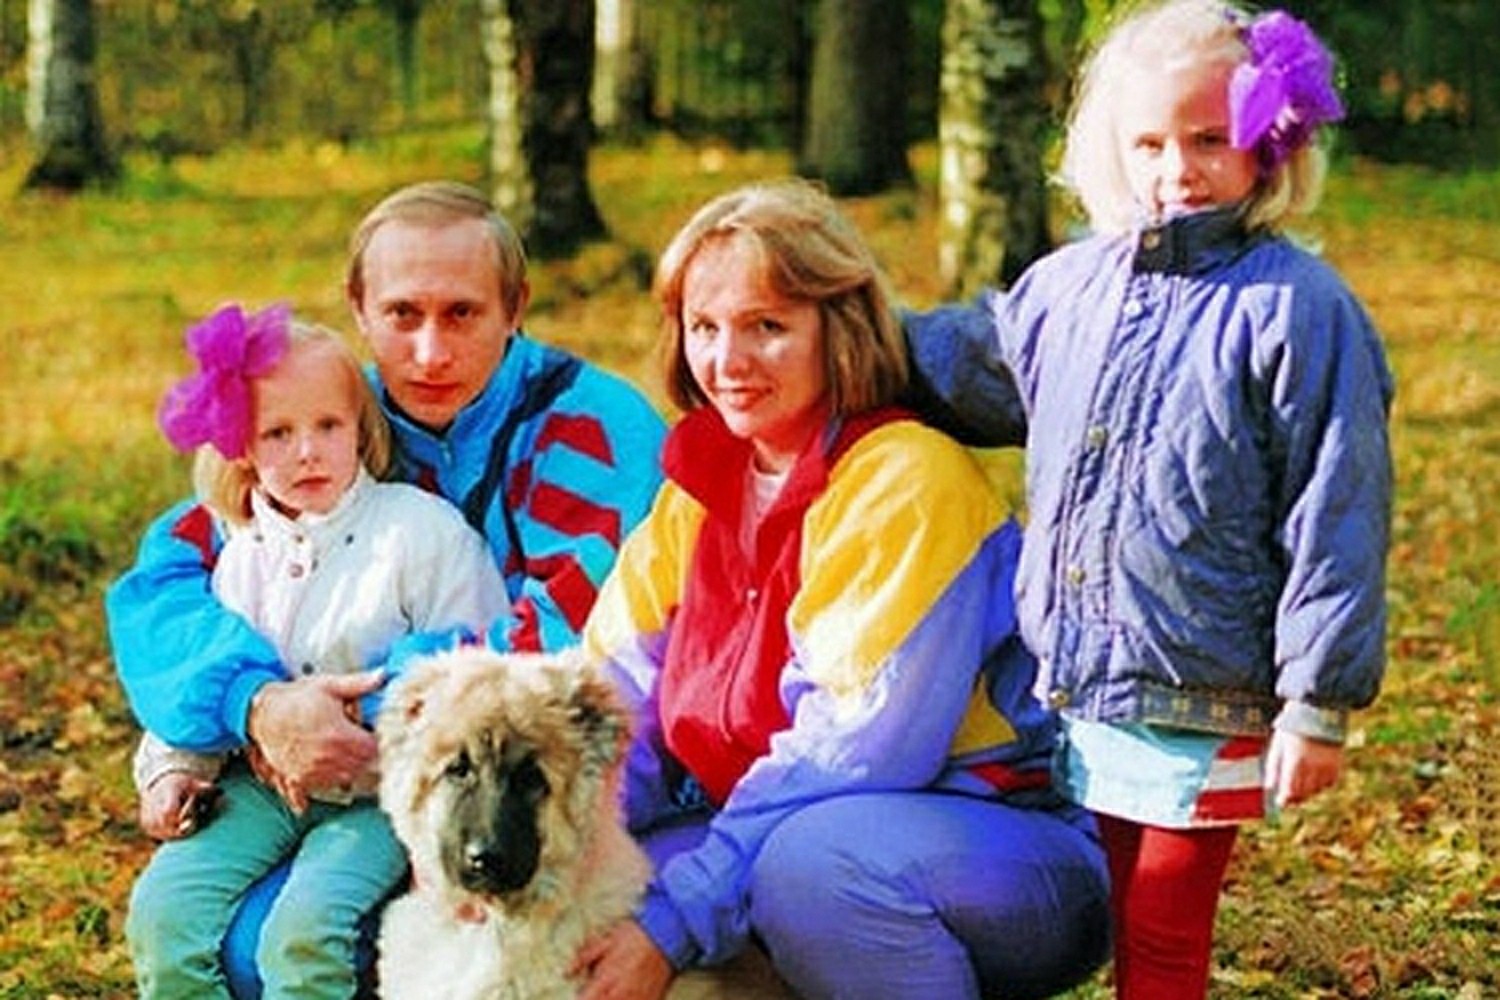 This is how Putin hides his family